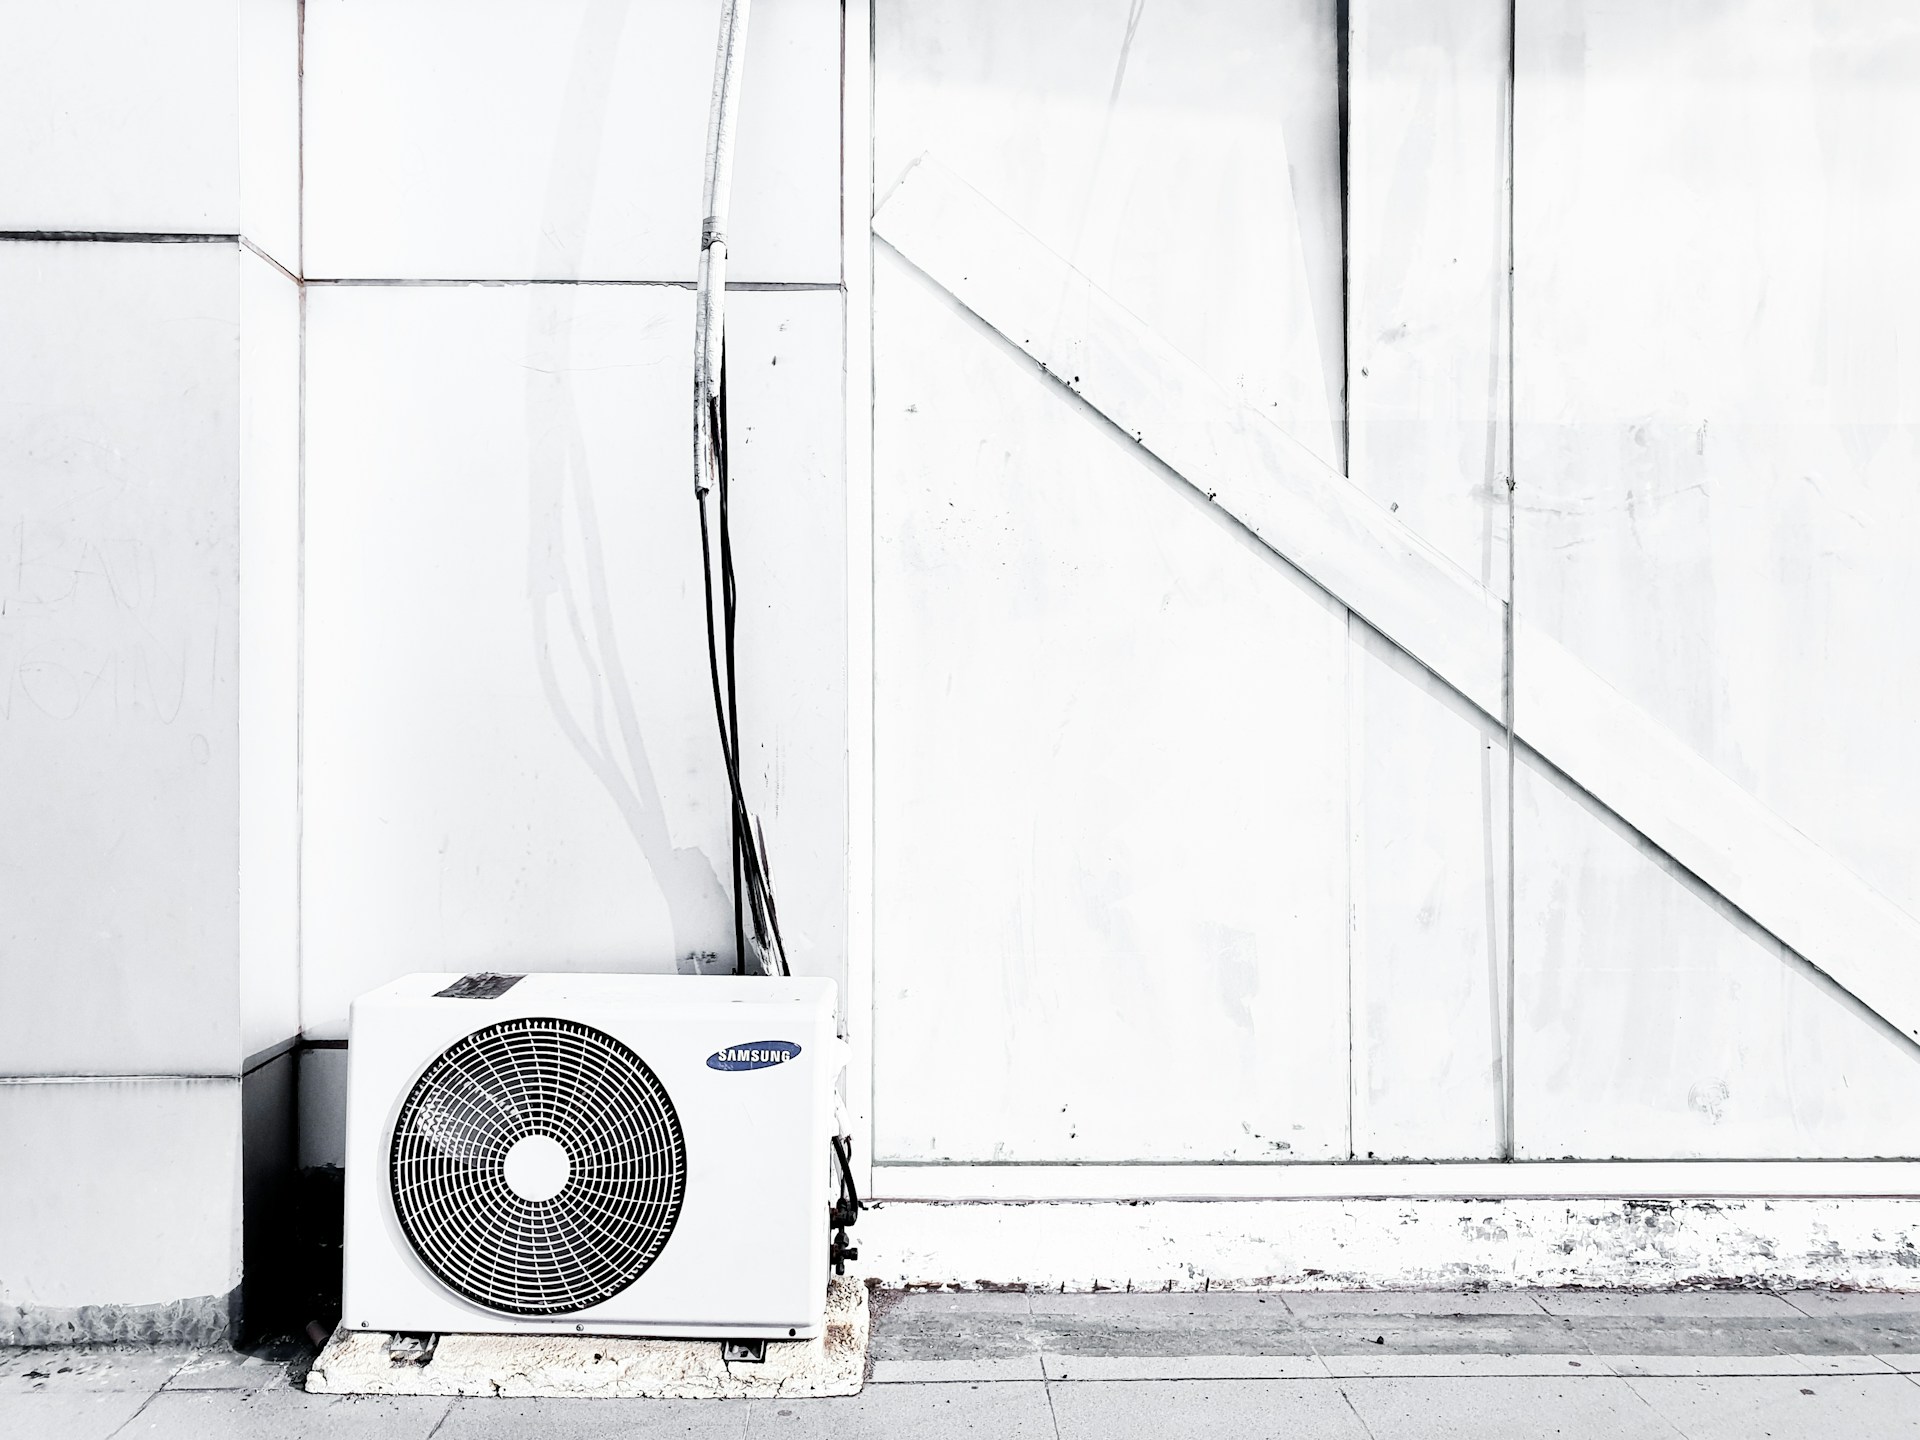 A/C, air conditioning unit outside a building. Image by Unsplash